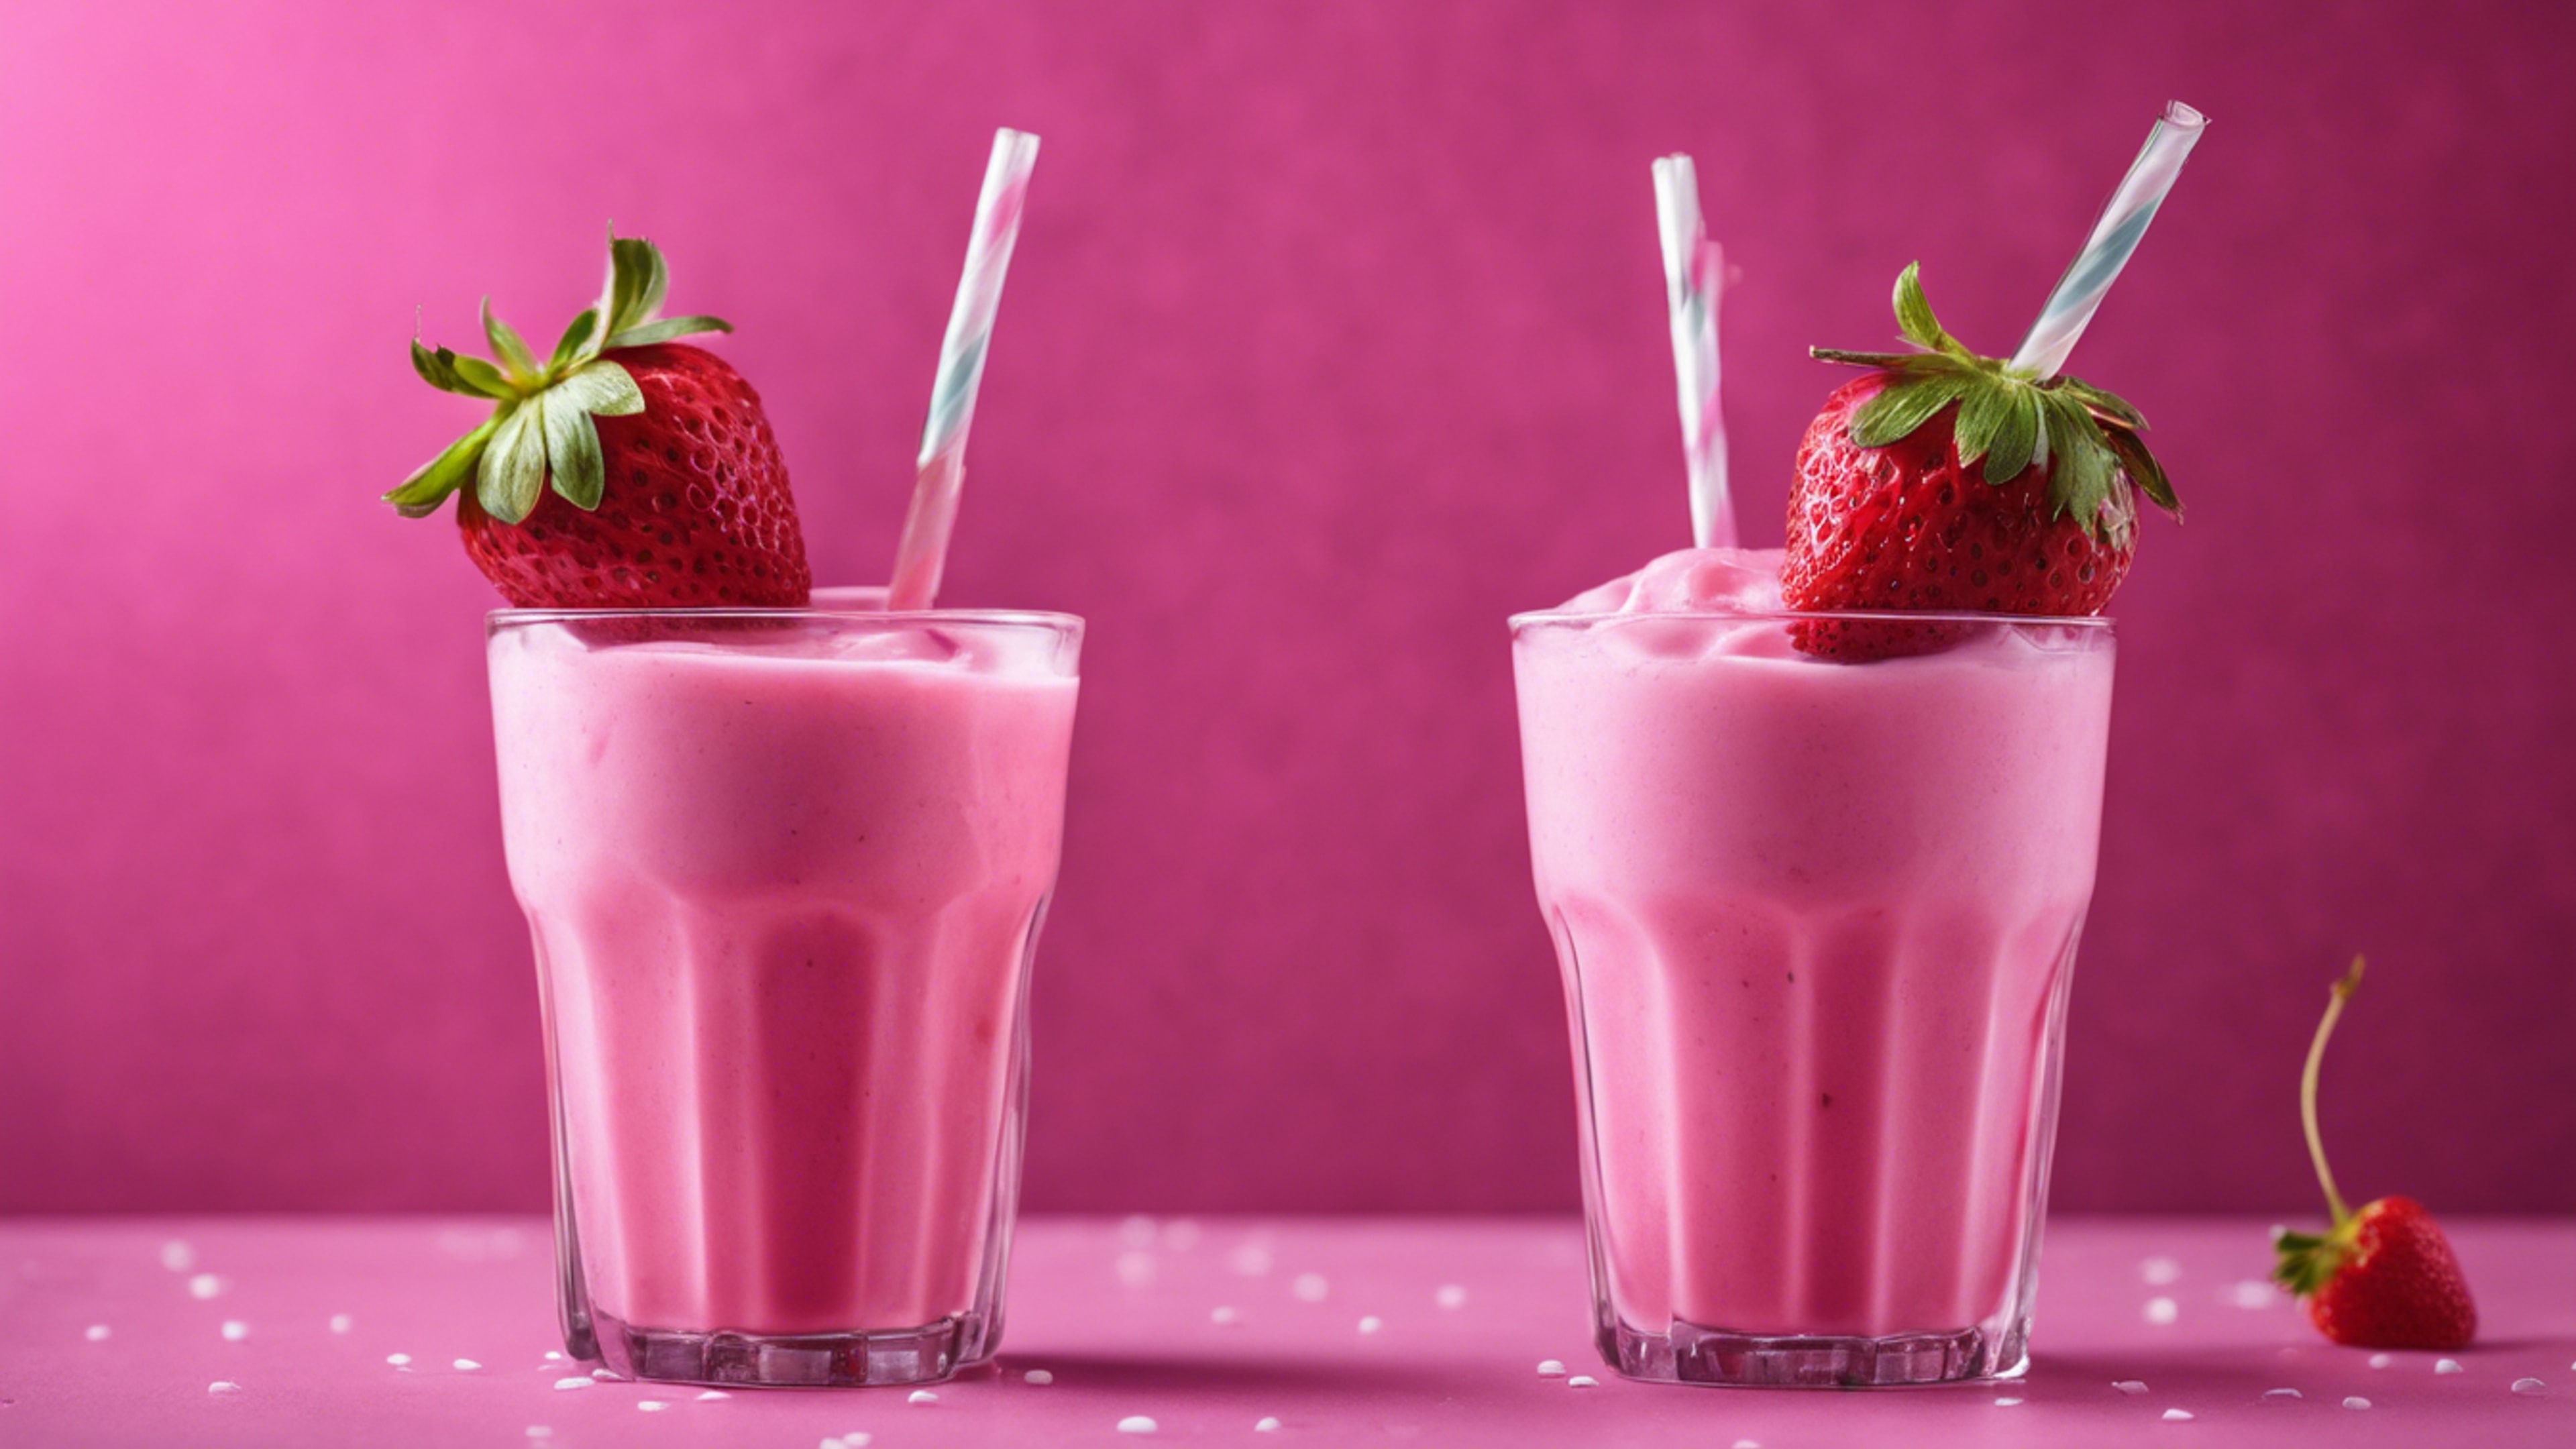 Two glasses filled with bright pink strawberry milkshake garnished with straws and cherries. Tapeta[367e513037cf4f879d8a]